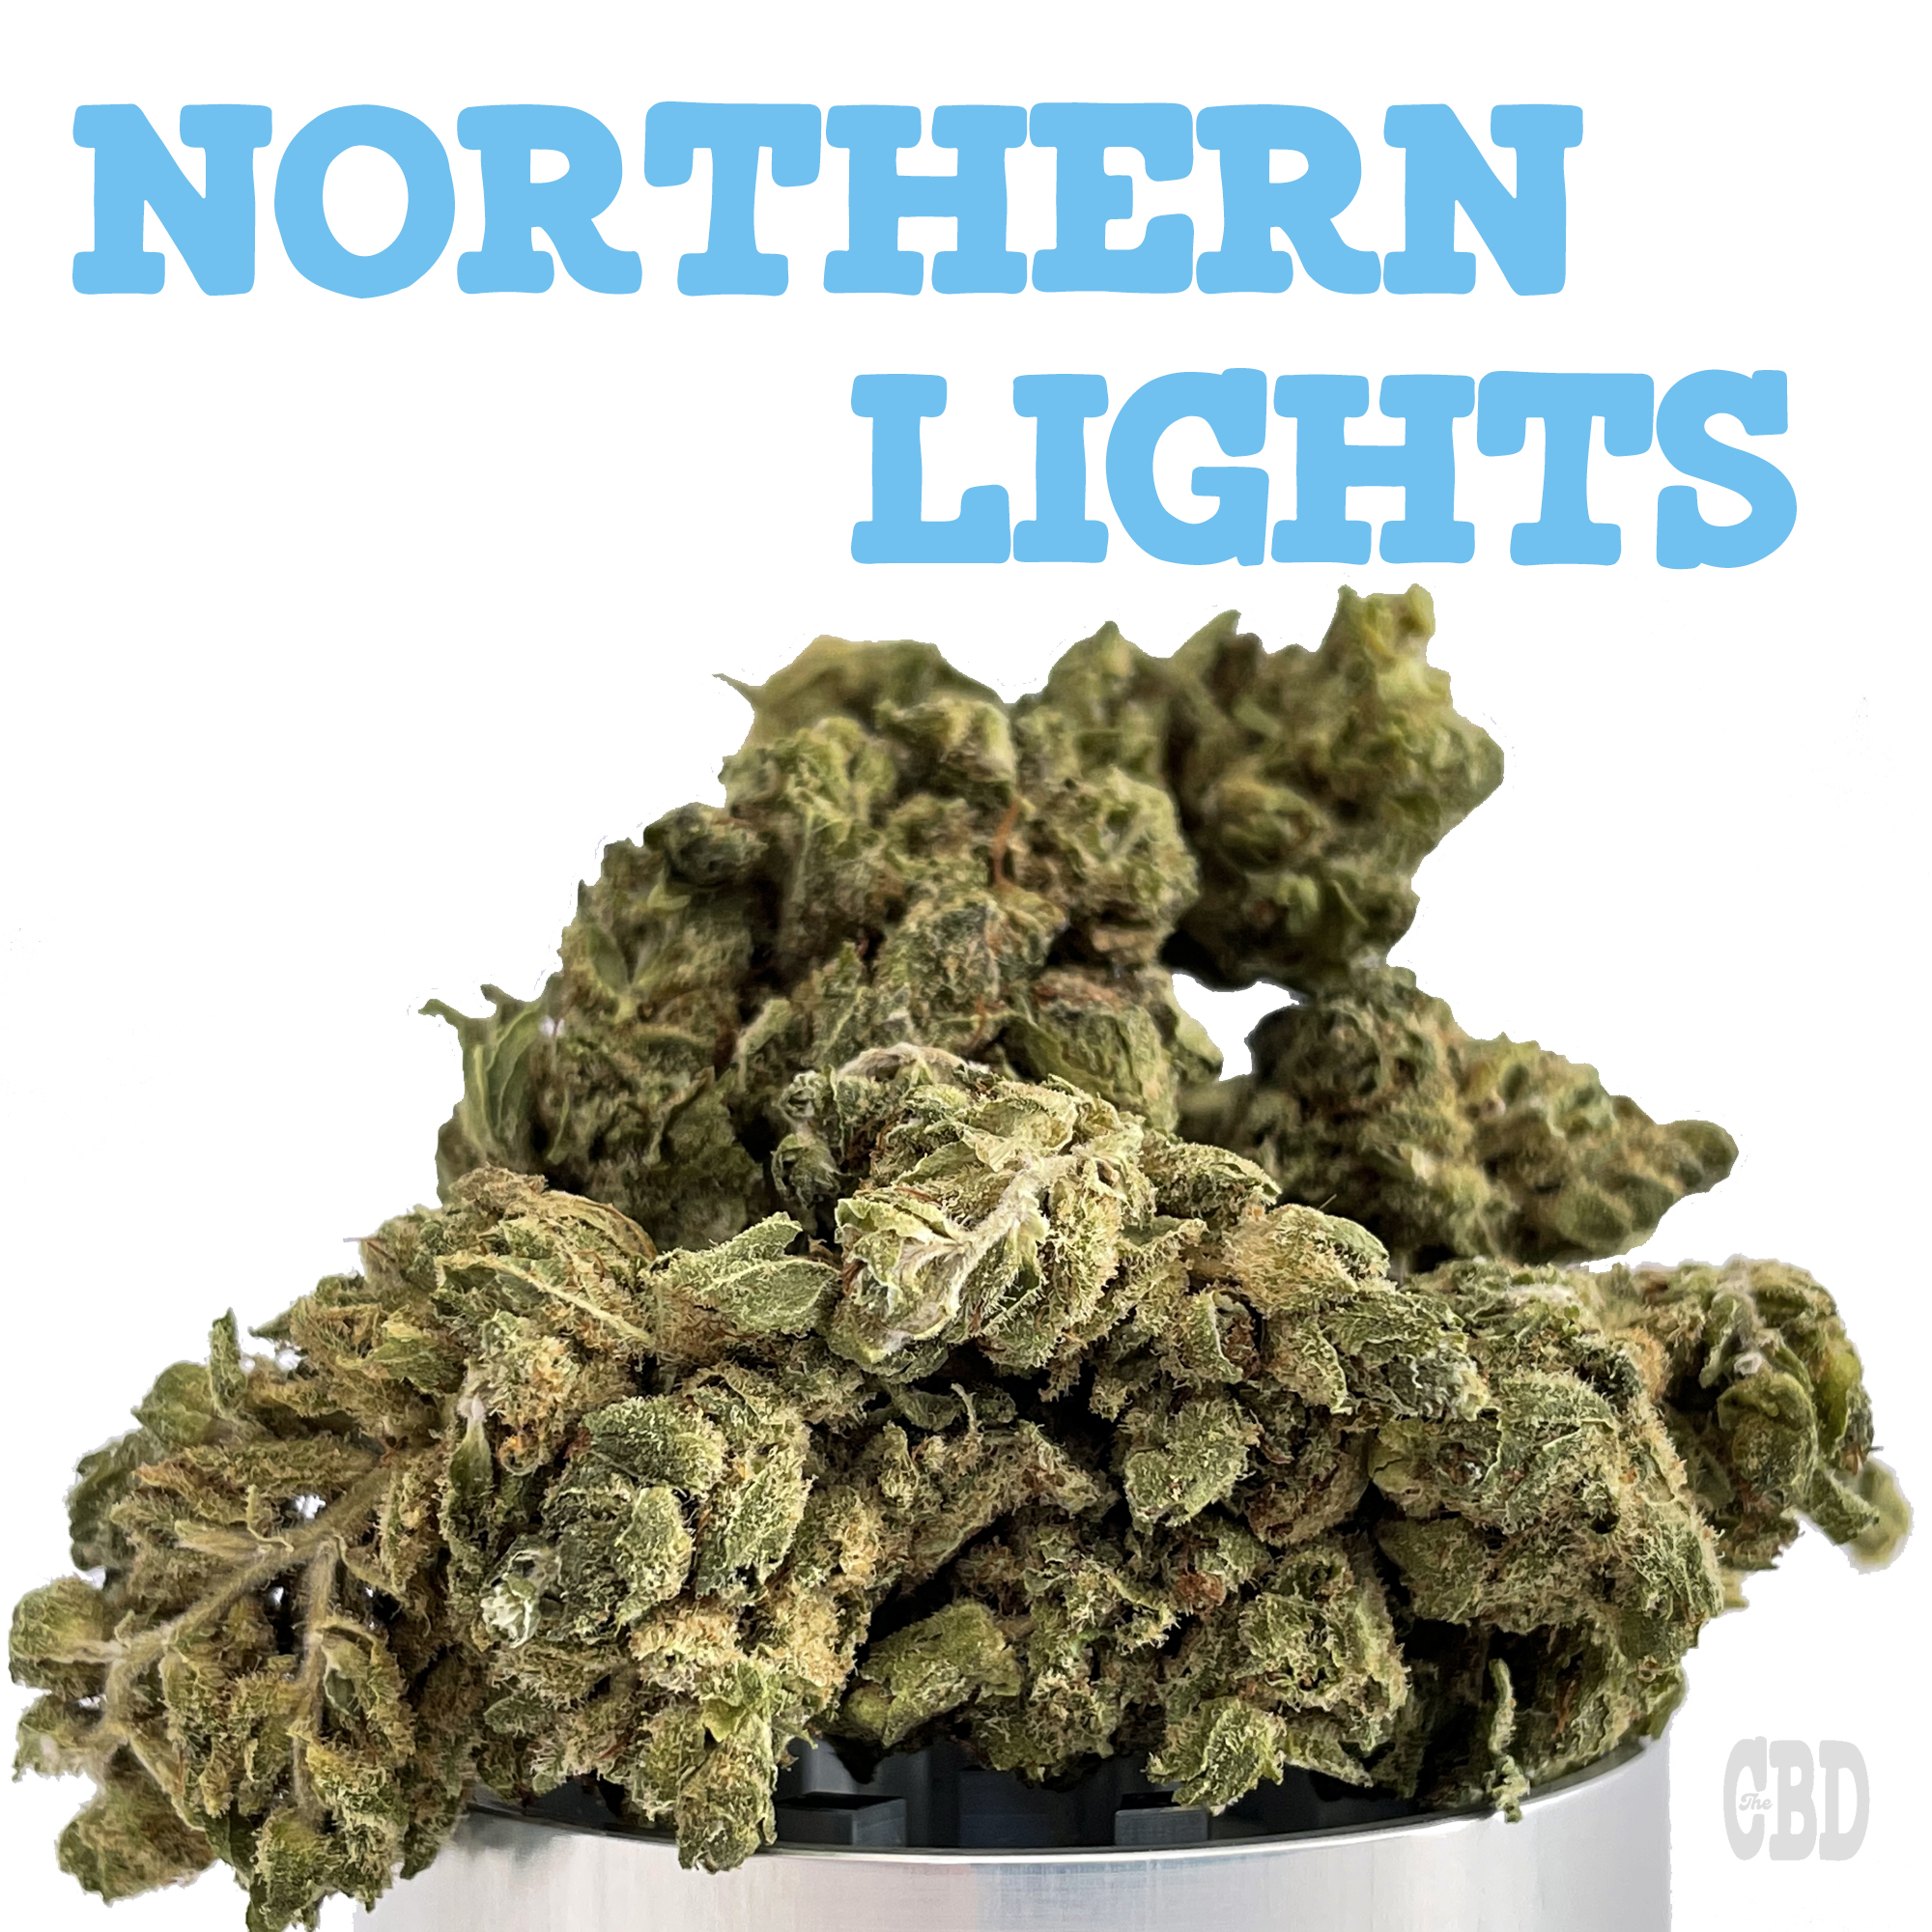 Northern Lights CBD by Thecbdstore